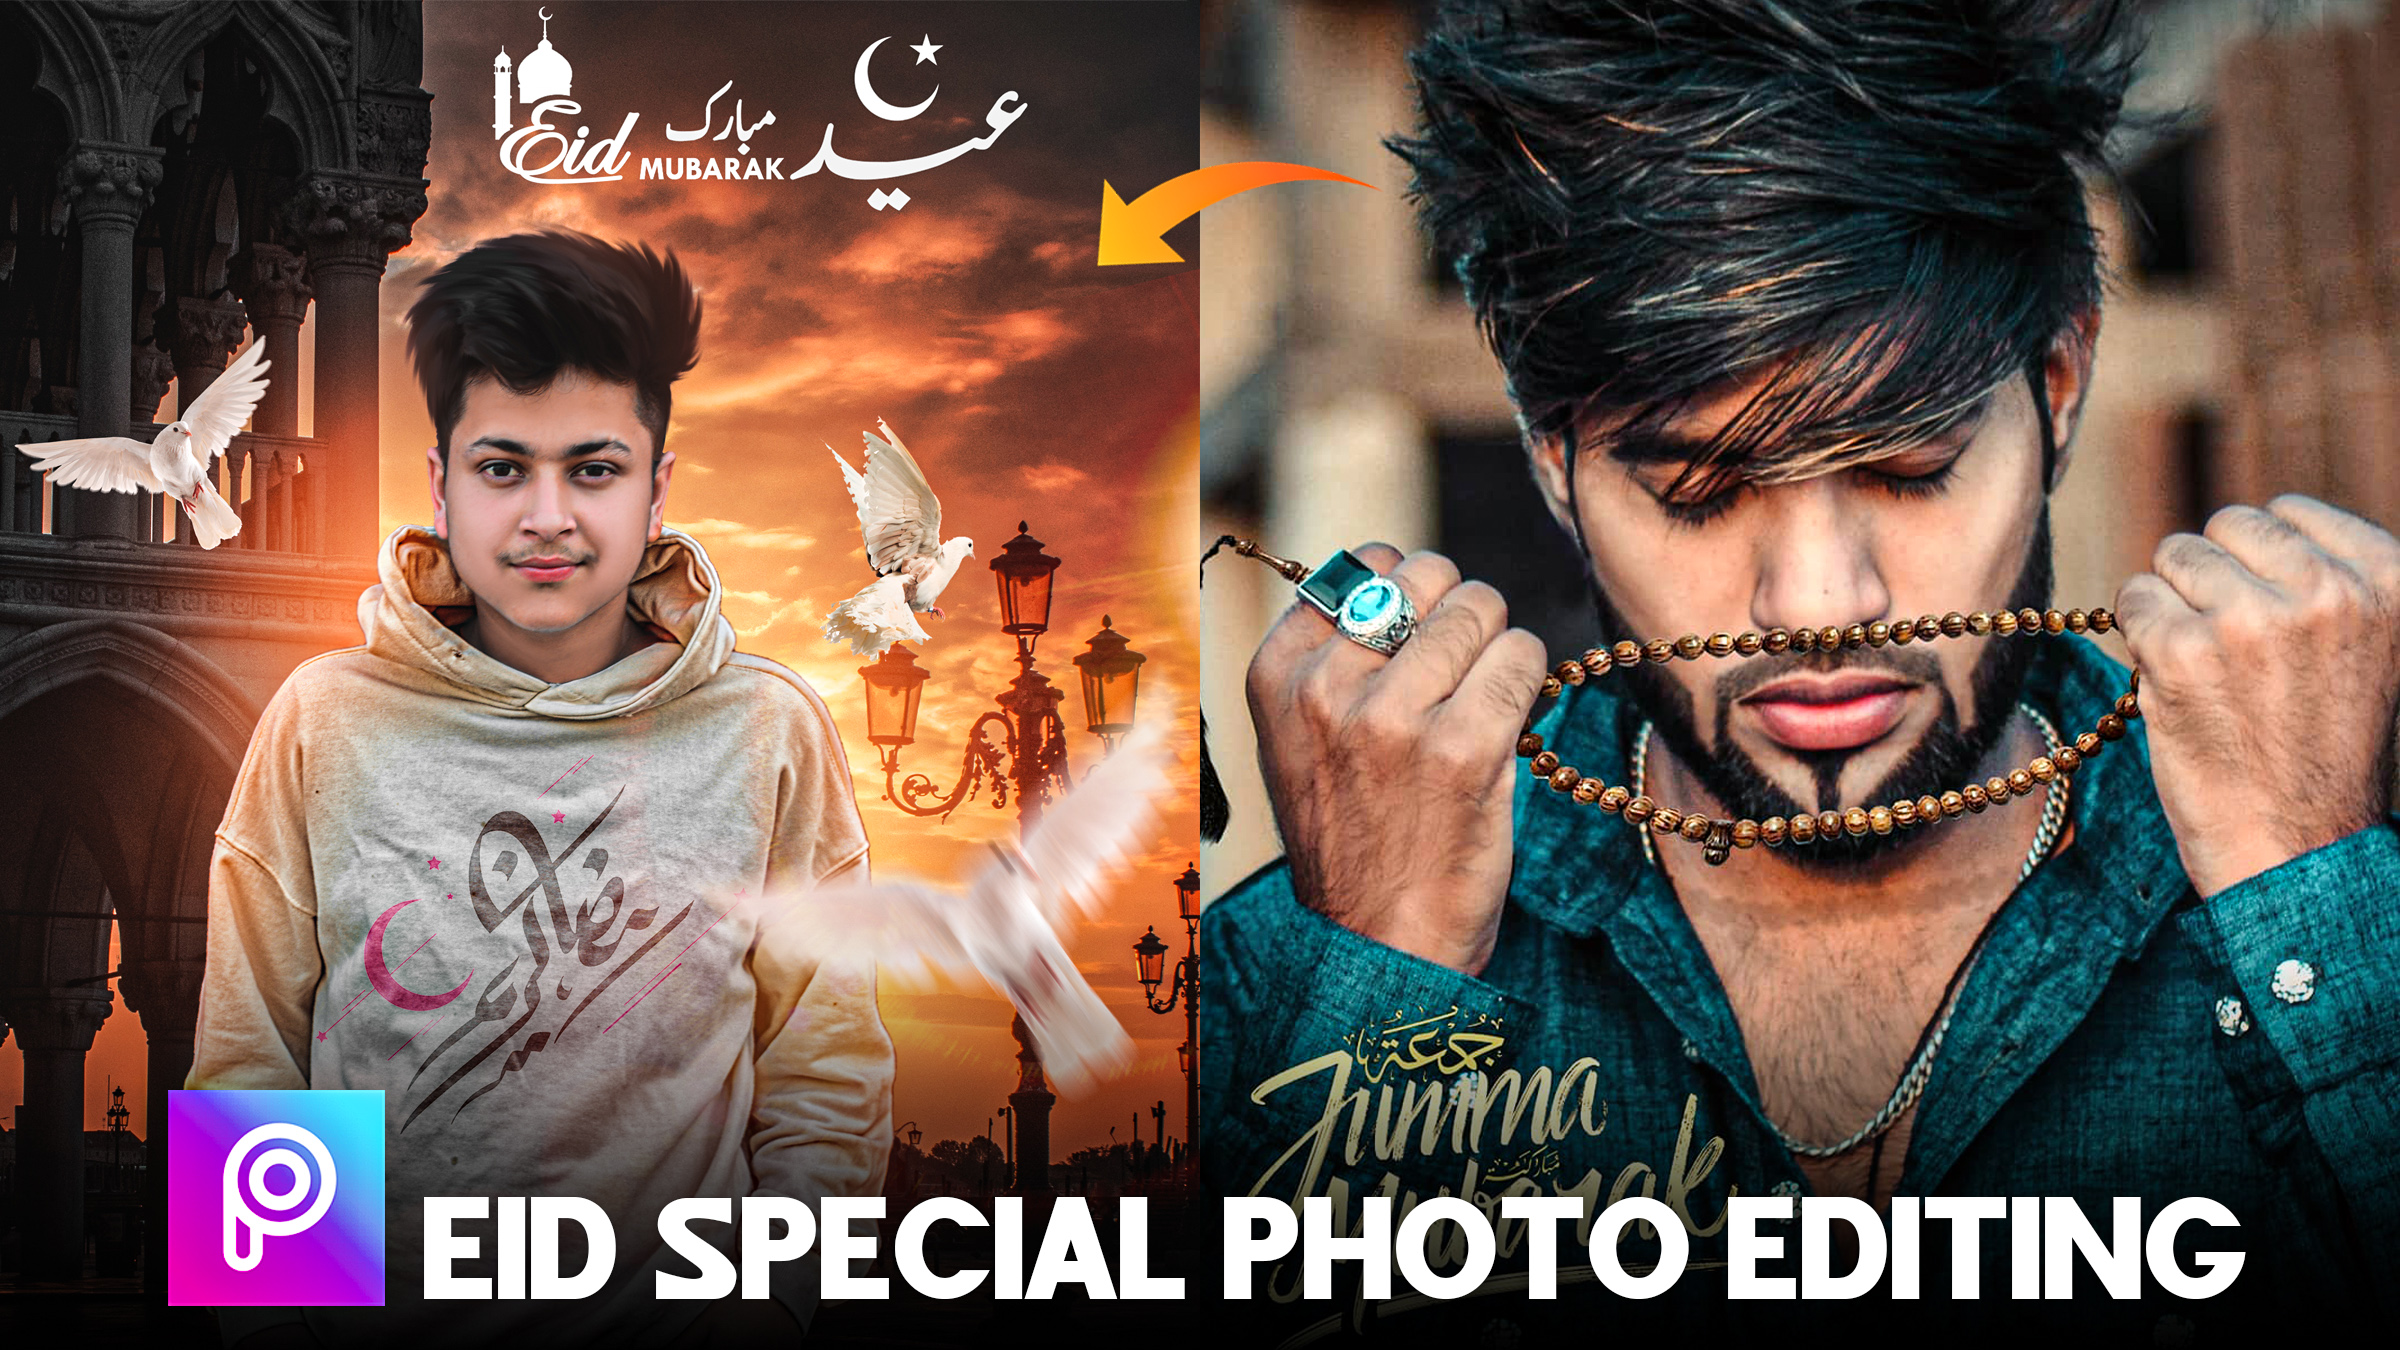 eid special photo editing backgrounds and png download for free